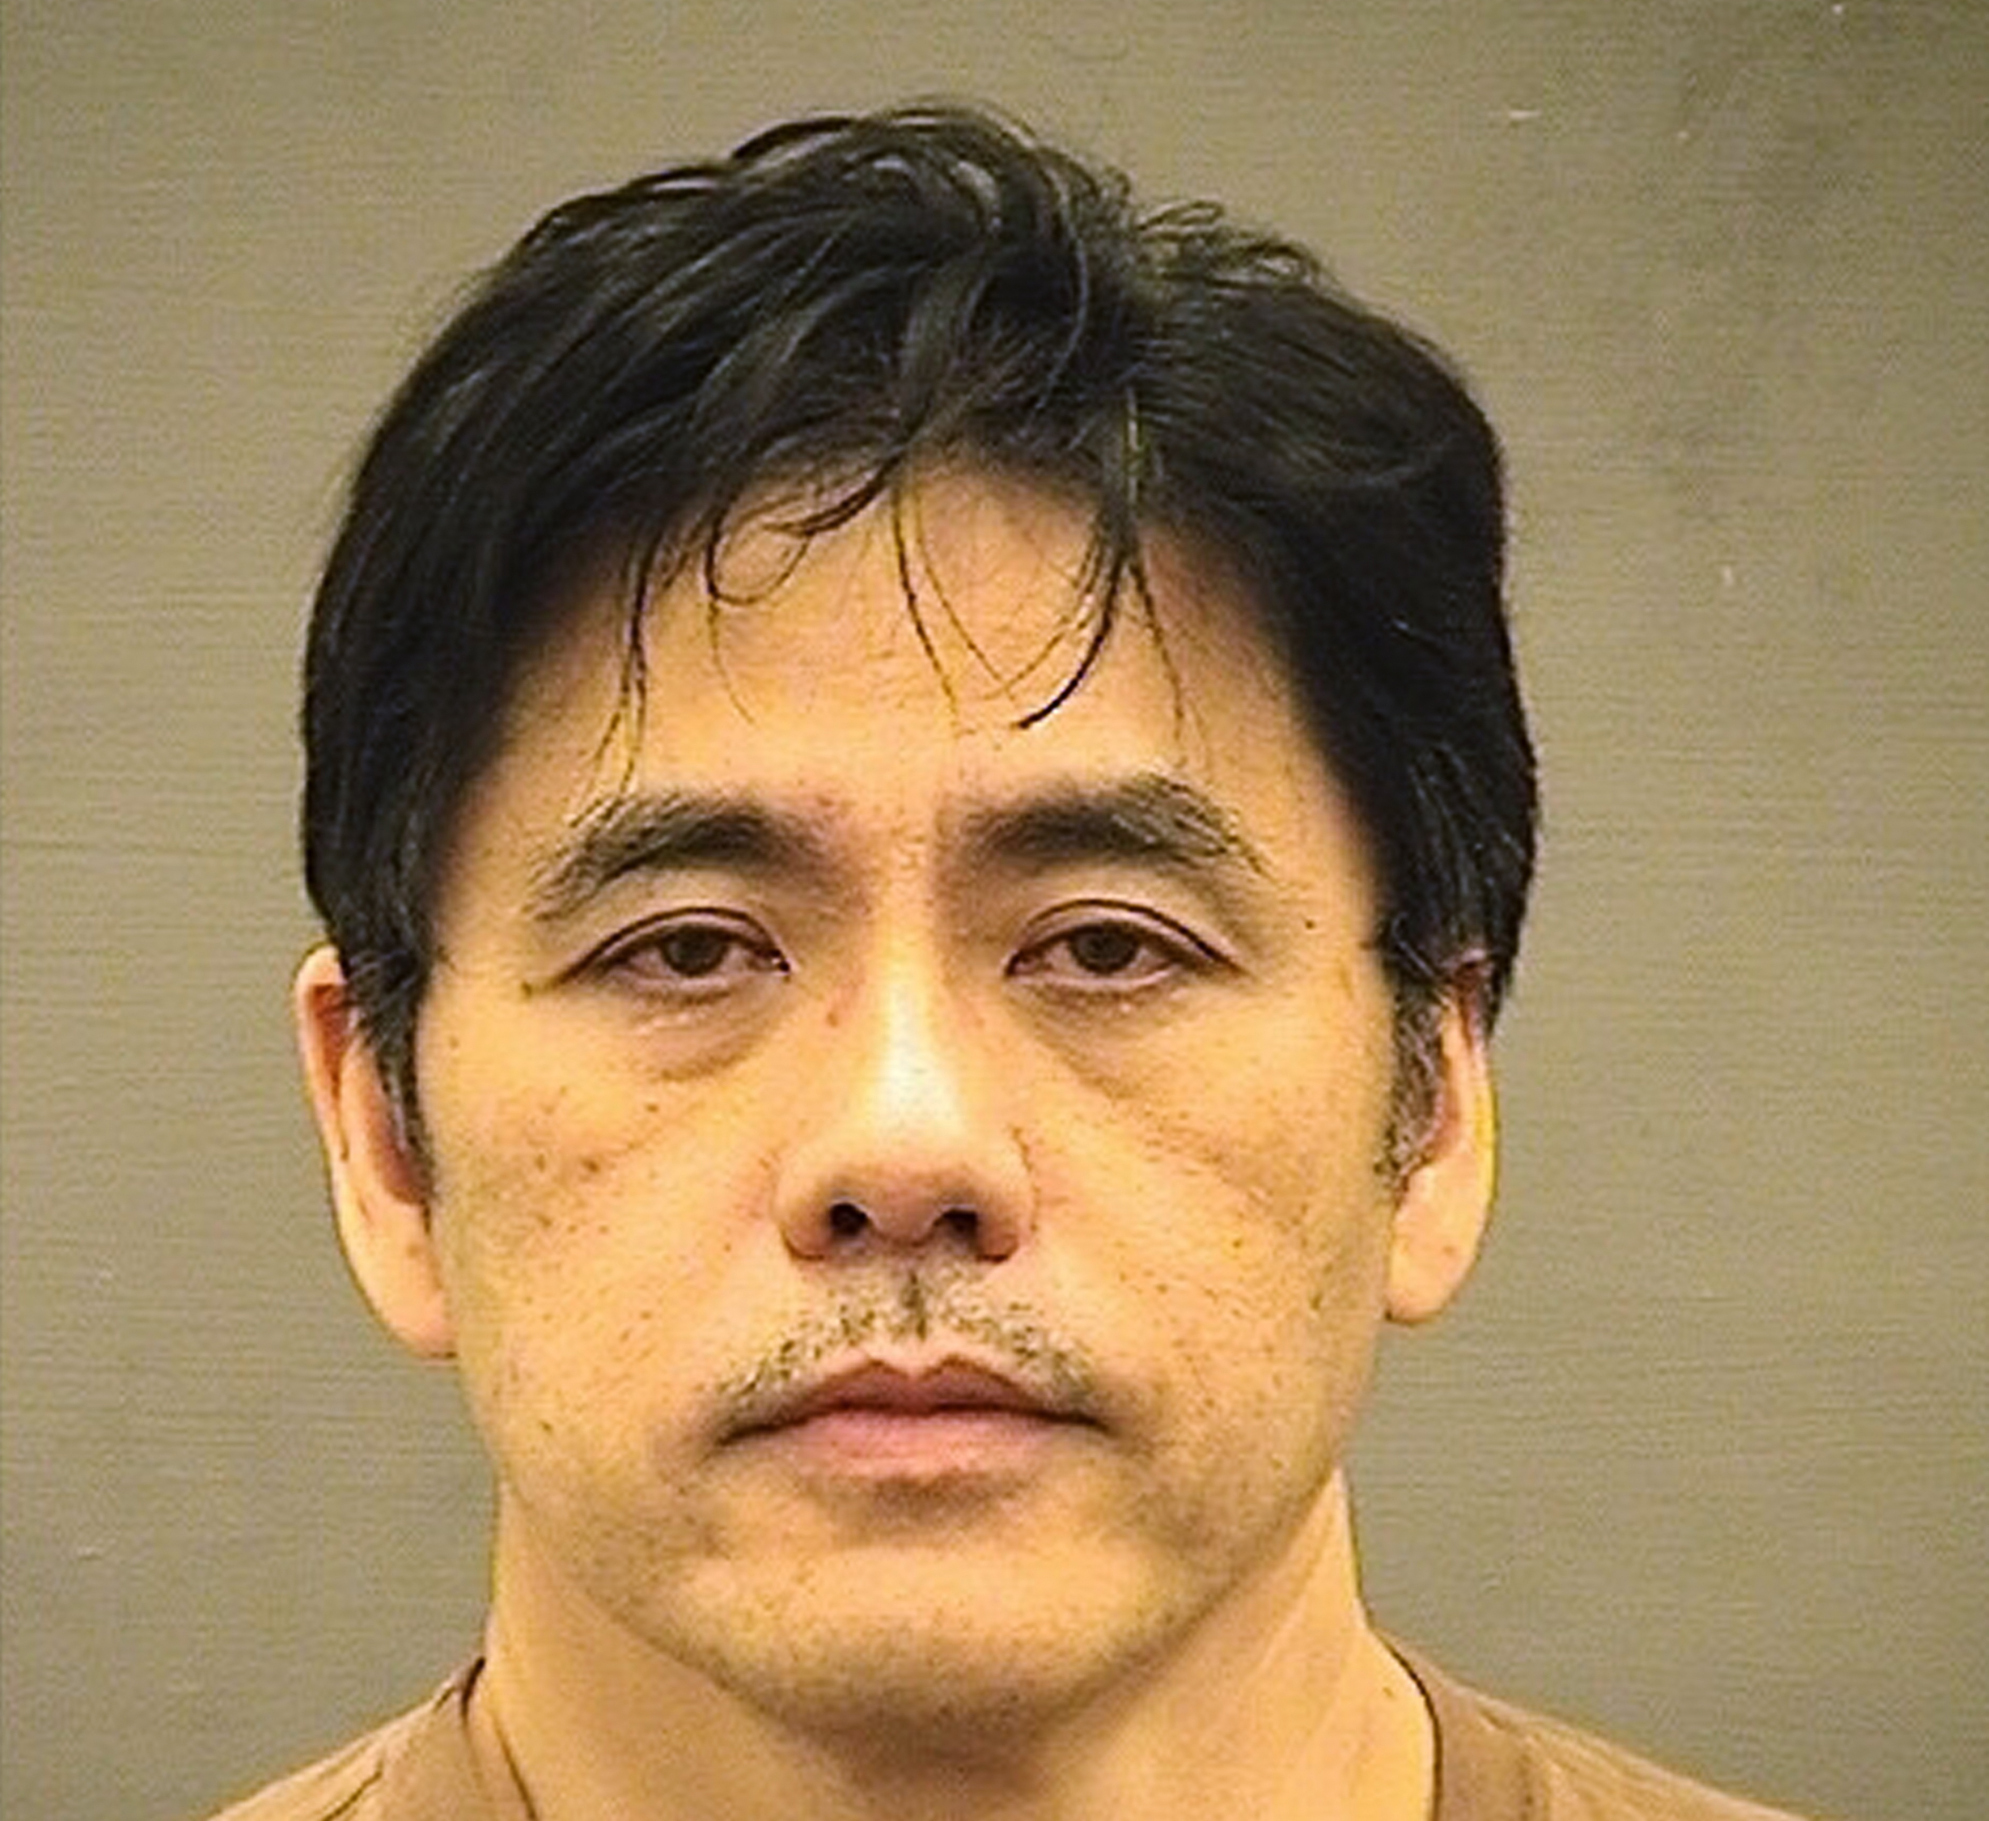 This undated photo provided by the Alexandria Sheriff’s Office shows Jerry Chun Shing Lee; the former CIA officer pleaded guilty to conspiring with China to commit espionage on May 1, 2019. (Alexandria Sheriff’s Office&mdash;AP)